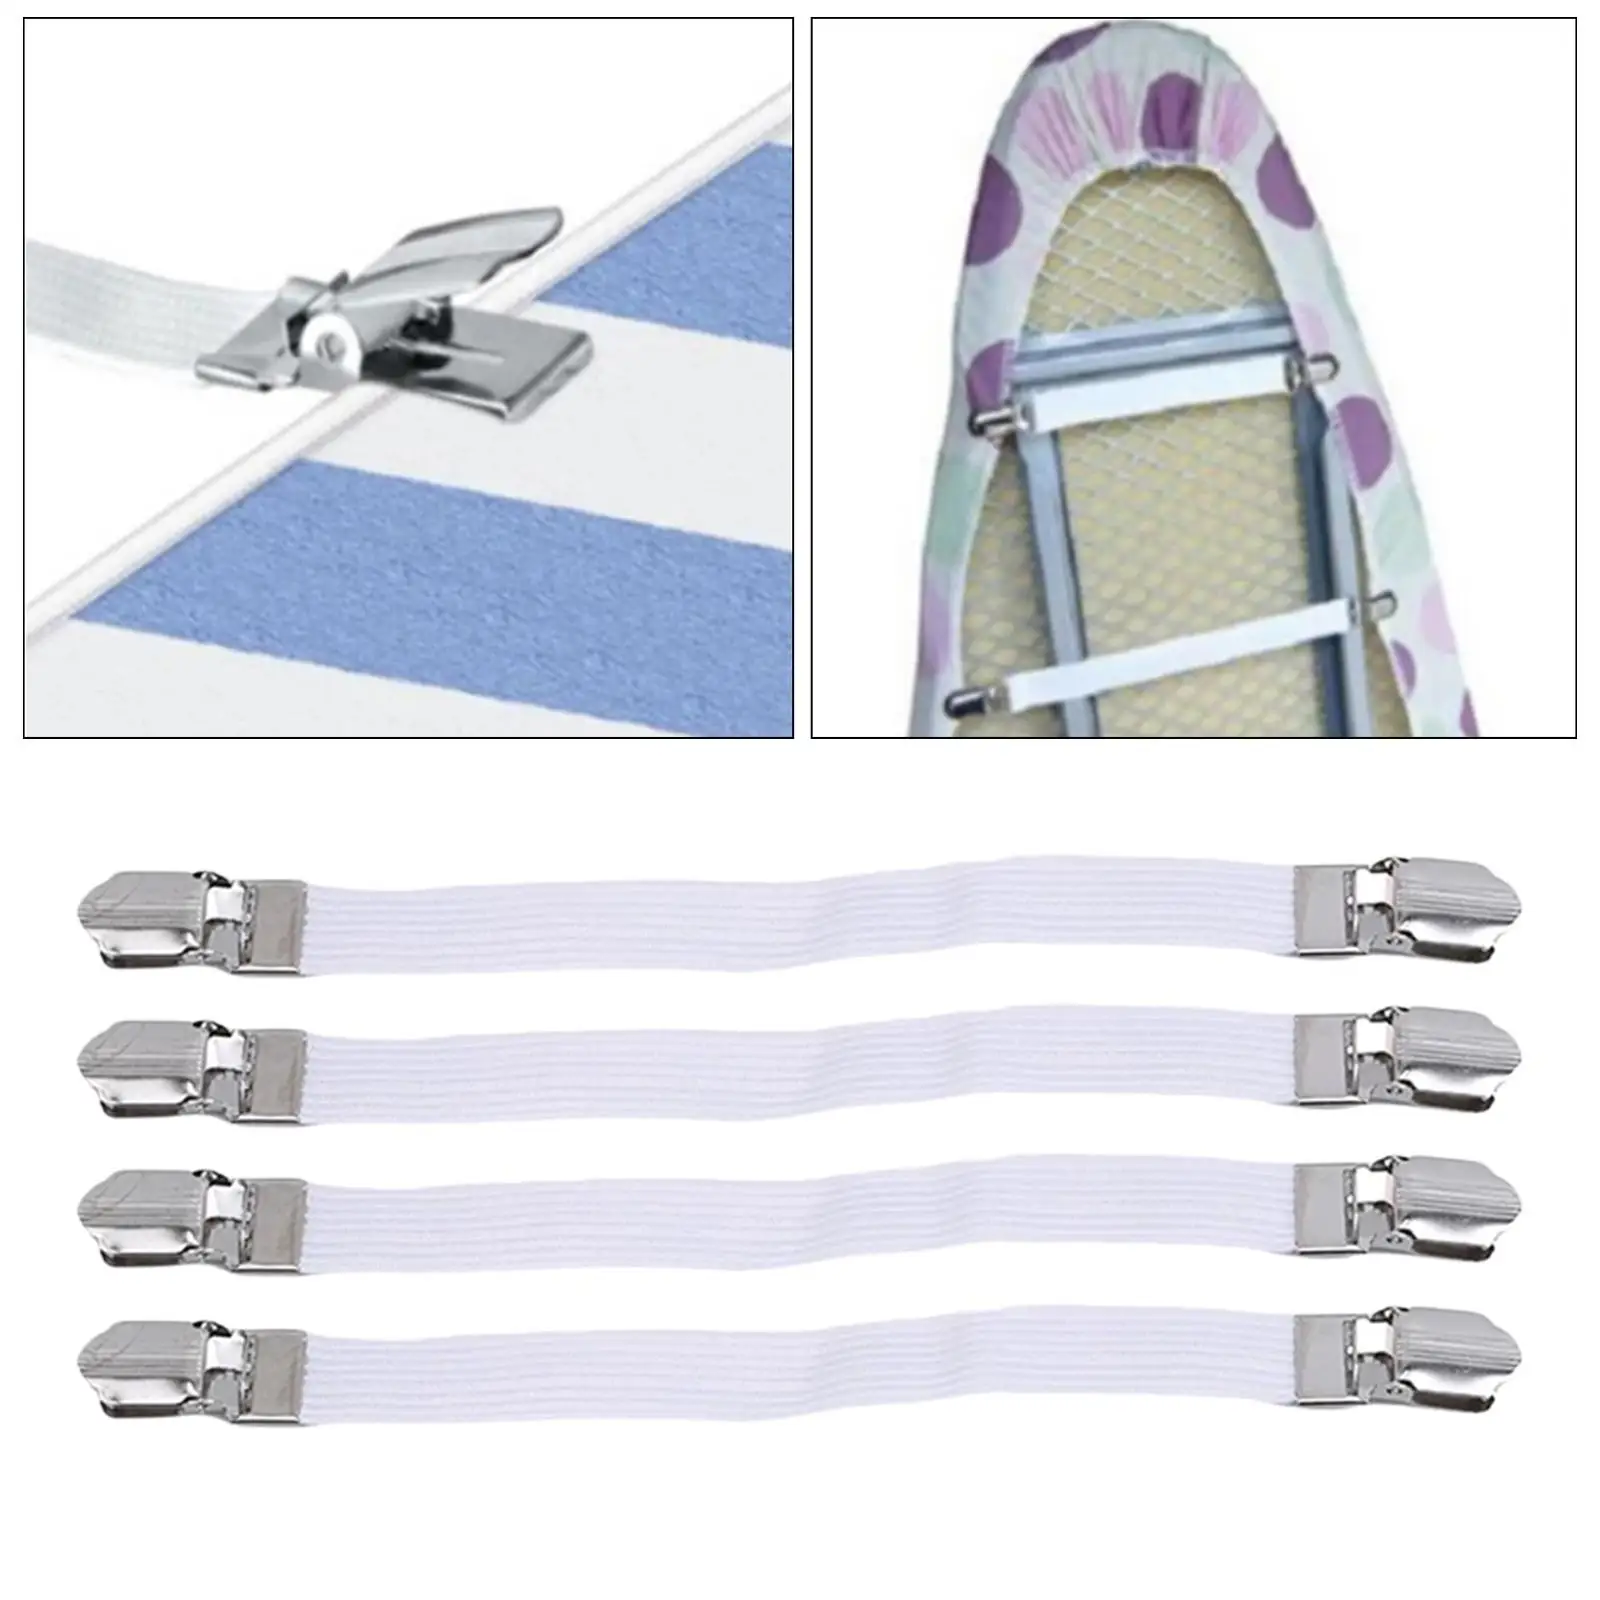 4Pcs Elastic Ironing Board Cover Fasteners, Band Straps Clips, Bed Sheet